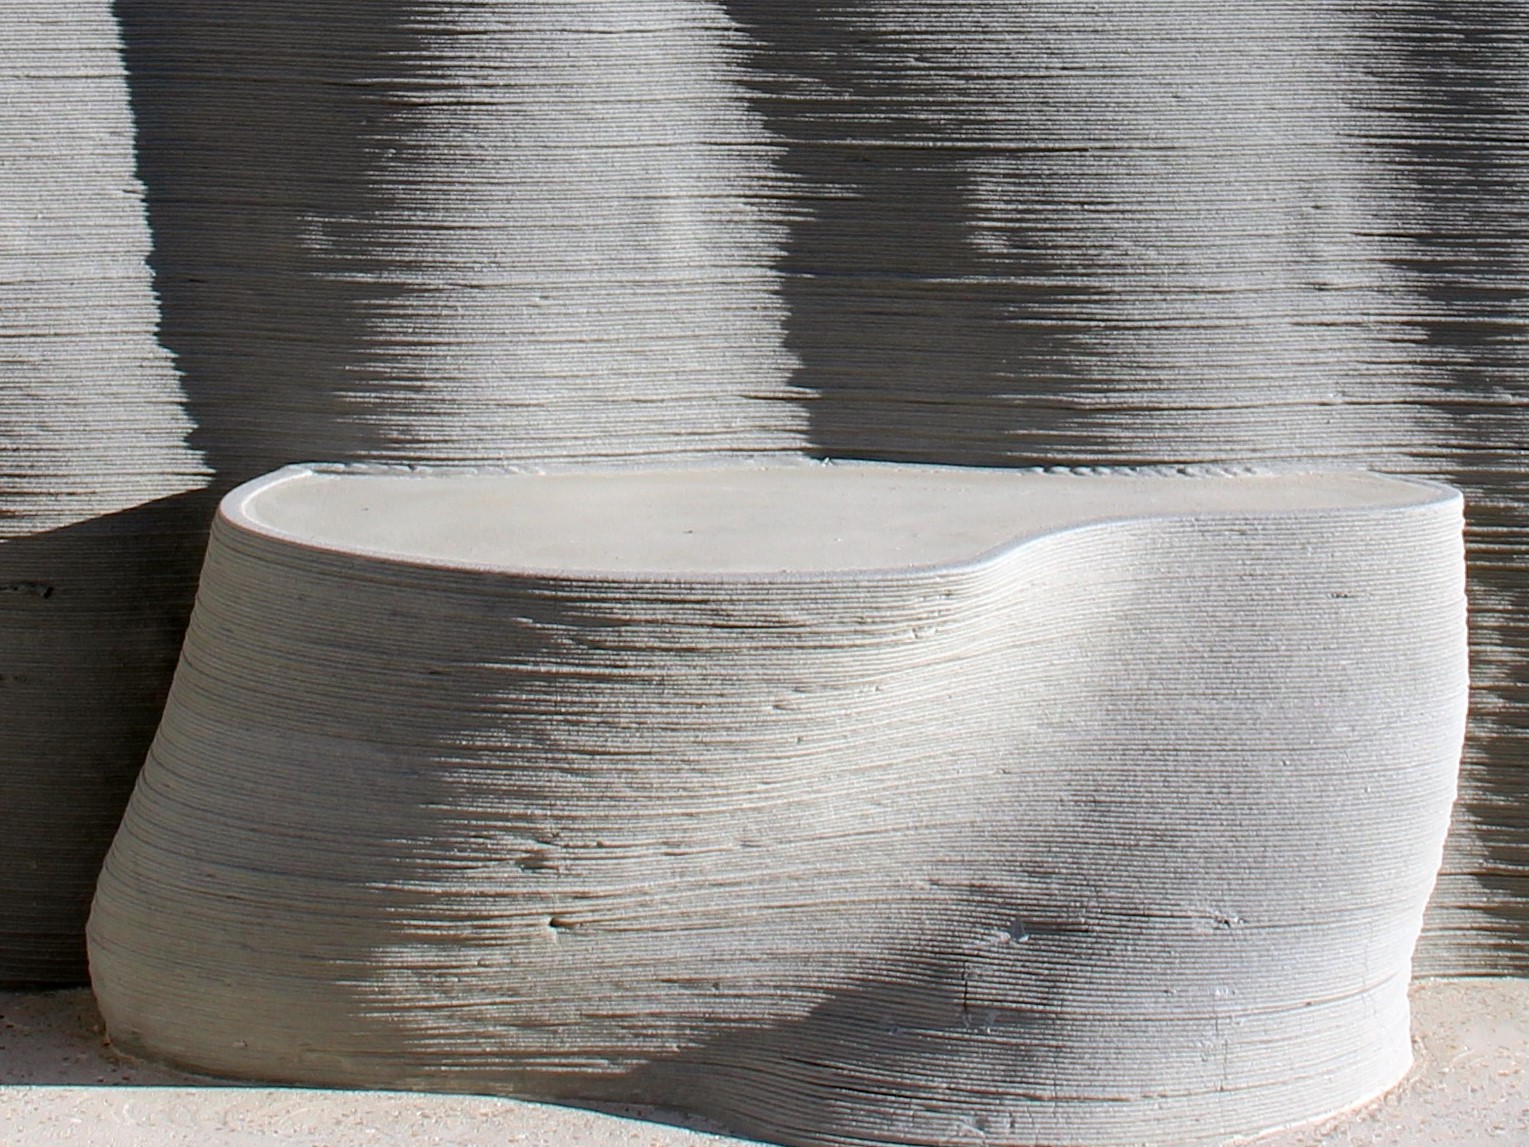 3D Concrete Printing Expands To World Construction